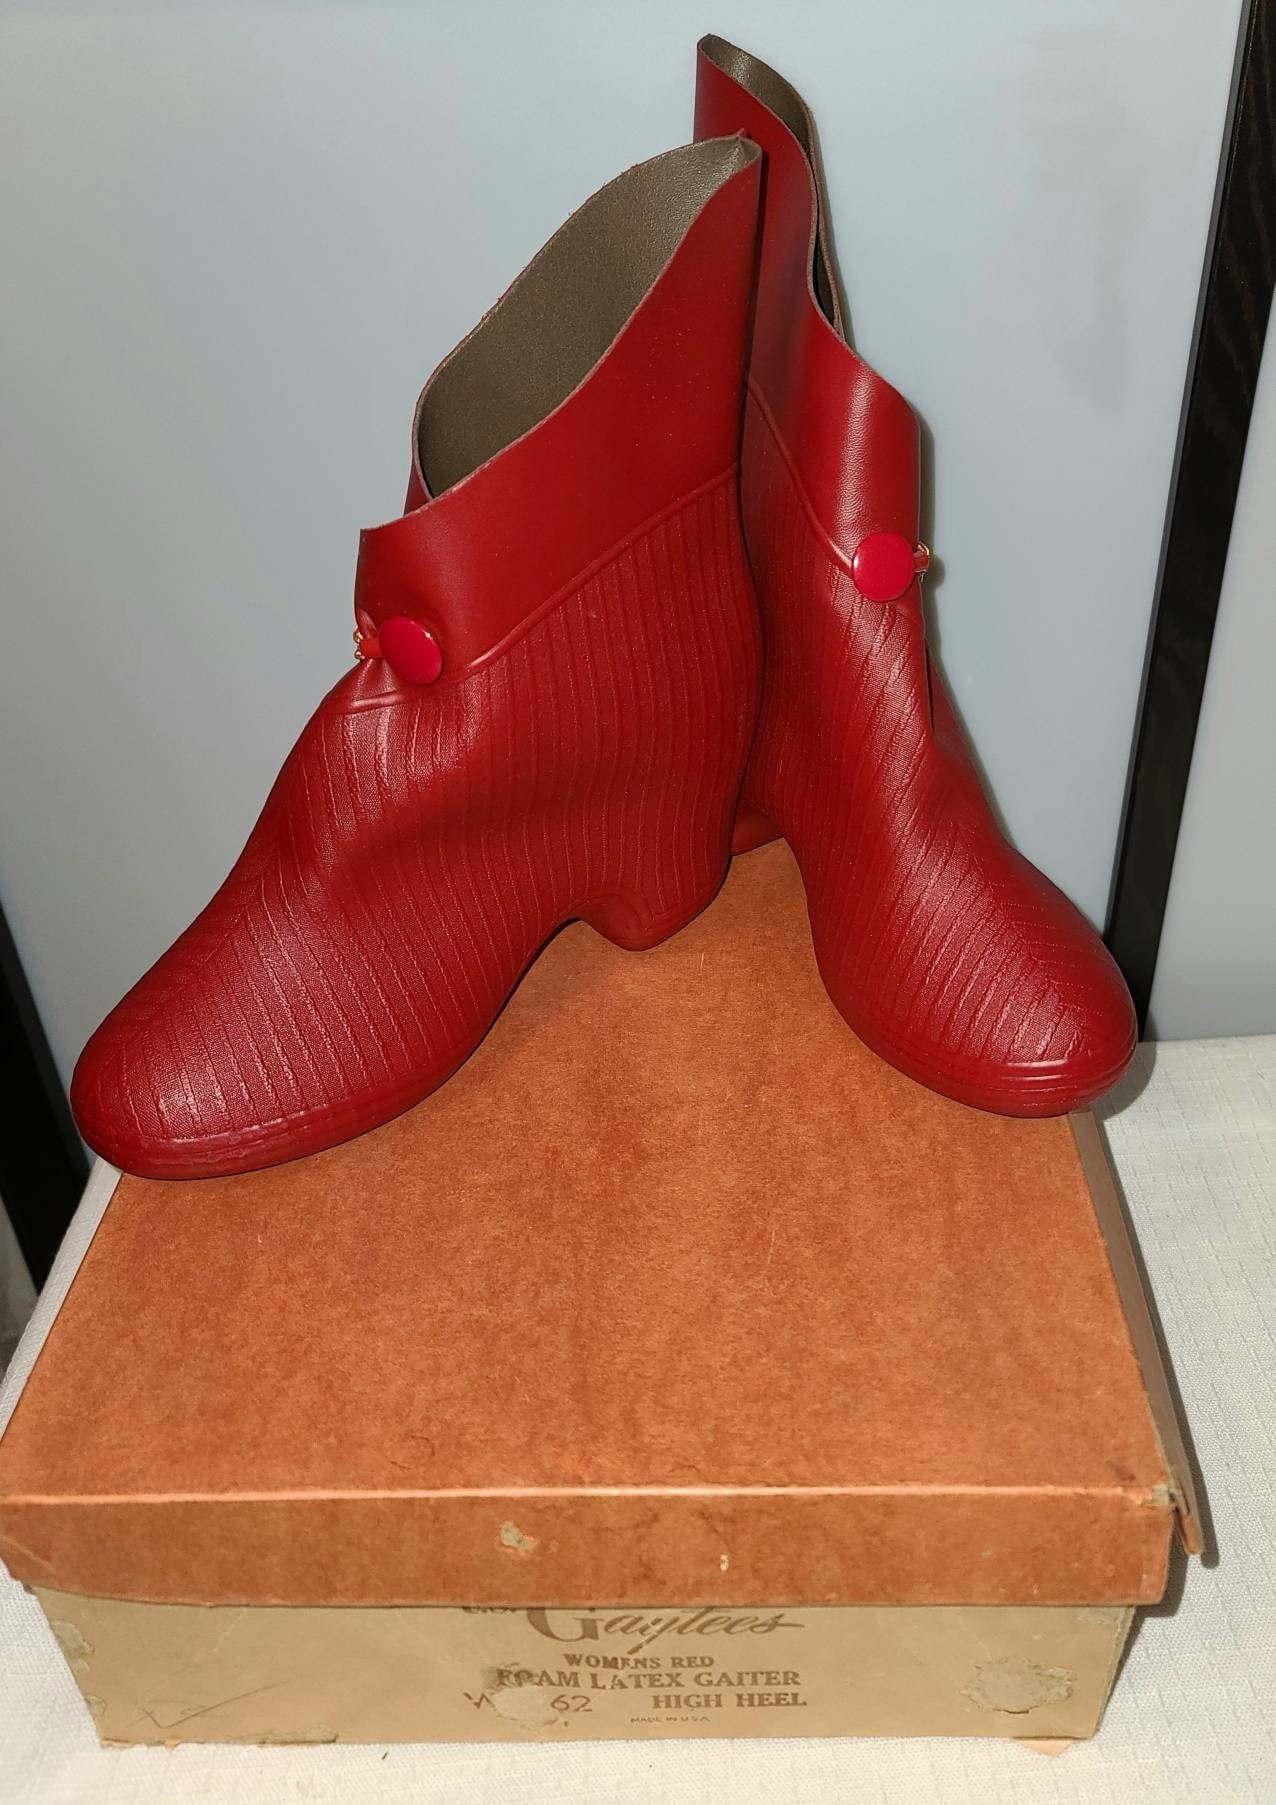 Vintage 1940s Galoshes Gaytees Cherry Red Latex Shoe Covers Rubber Gaiters Rain Boots with Heels in Box Rockabilly Fetish sz 5